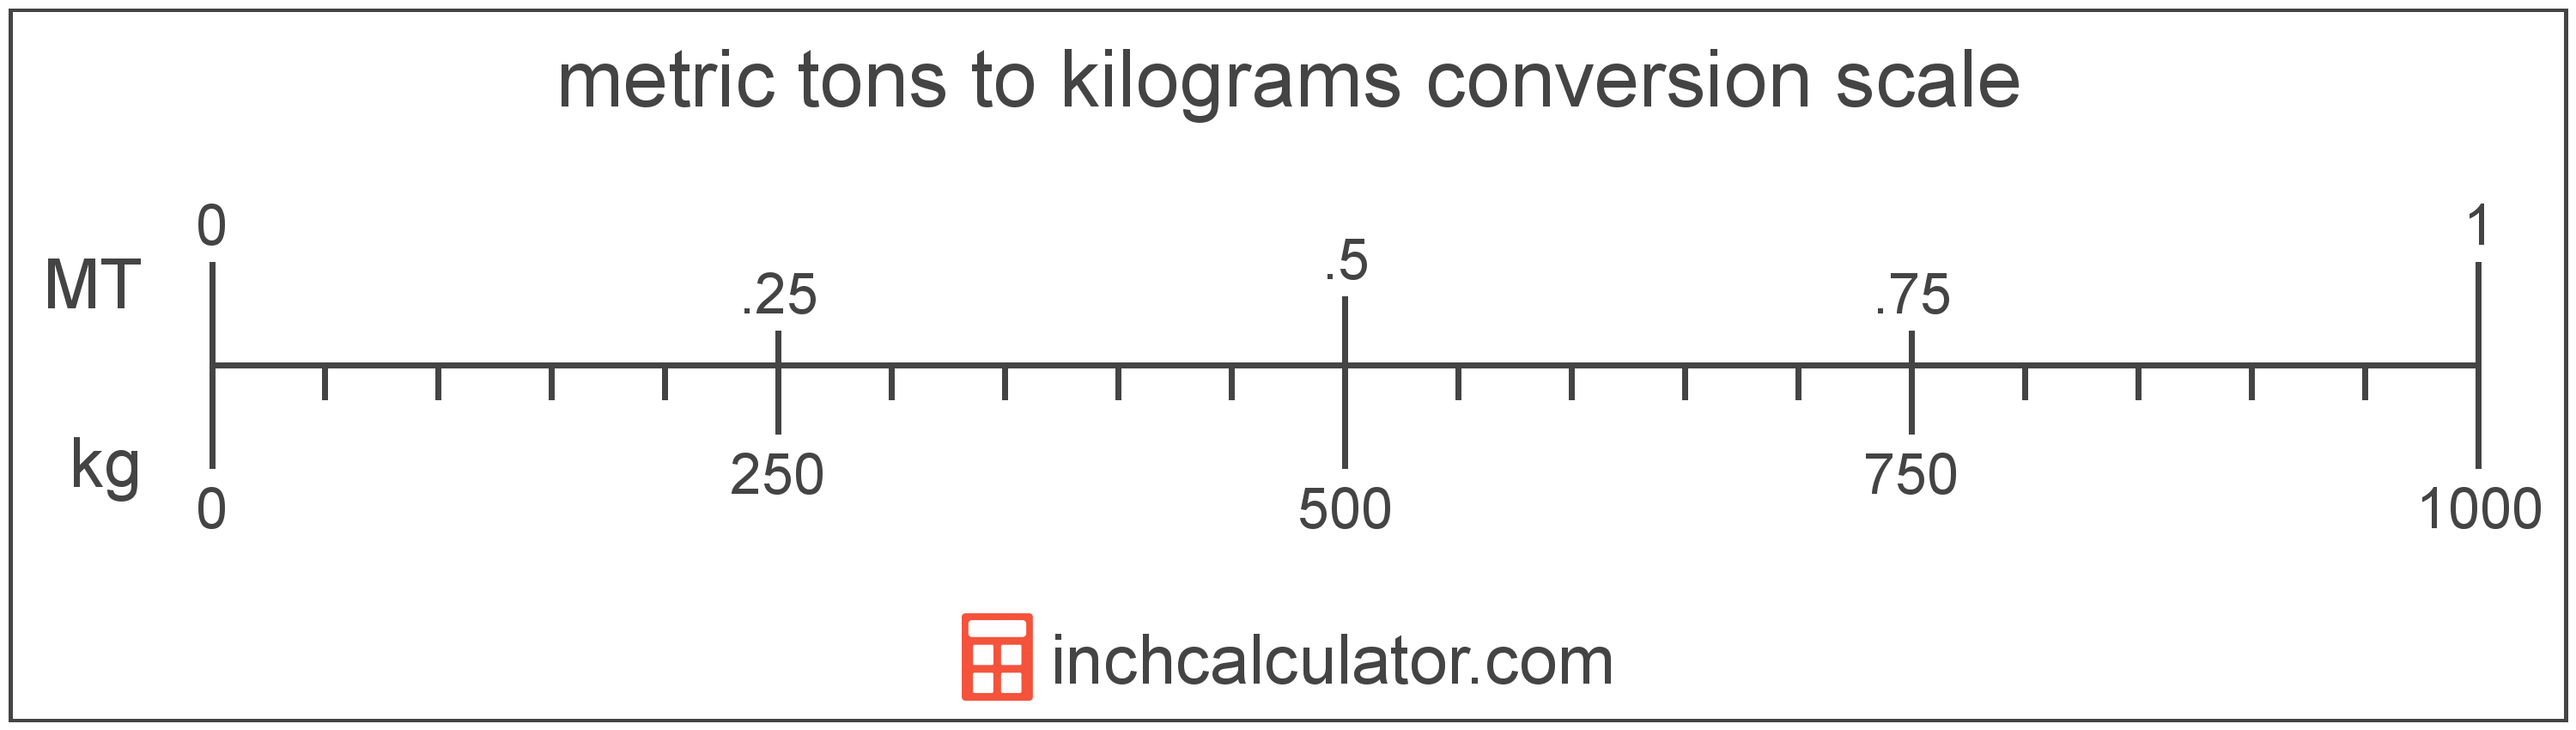 conversion scale showing kilograms and equivalent metric tons weight values